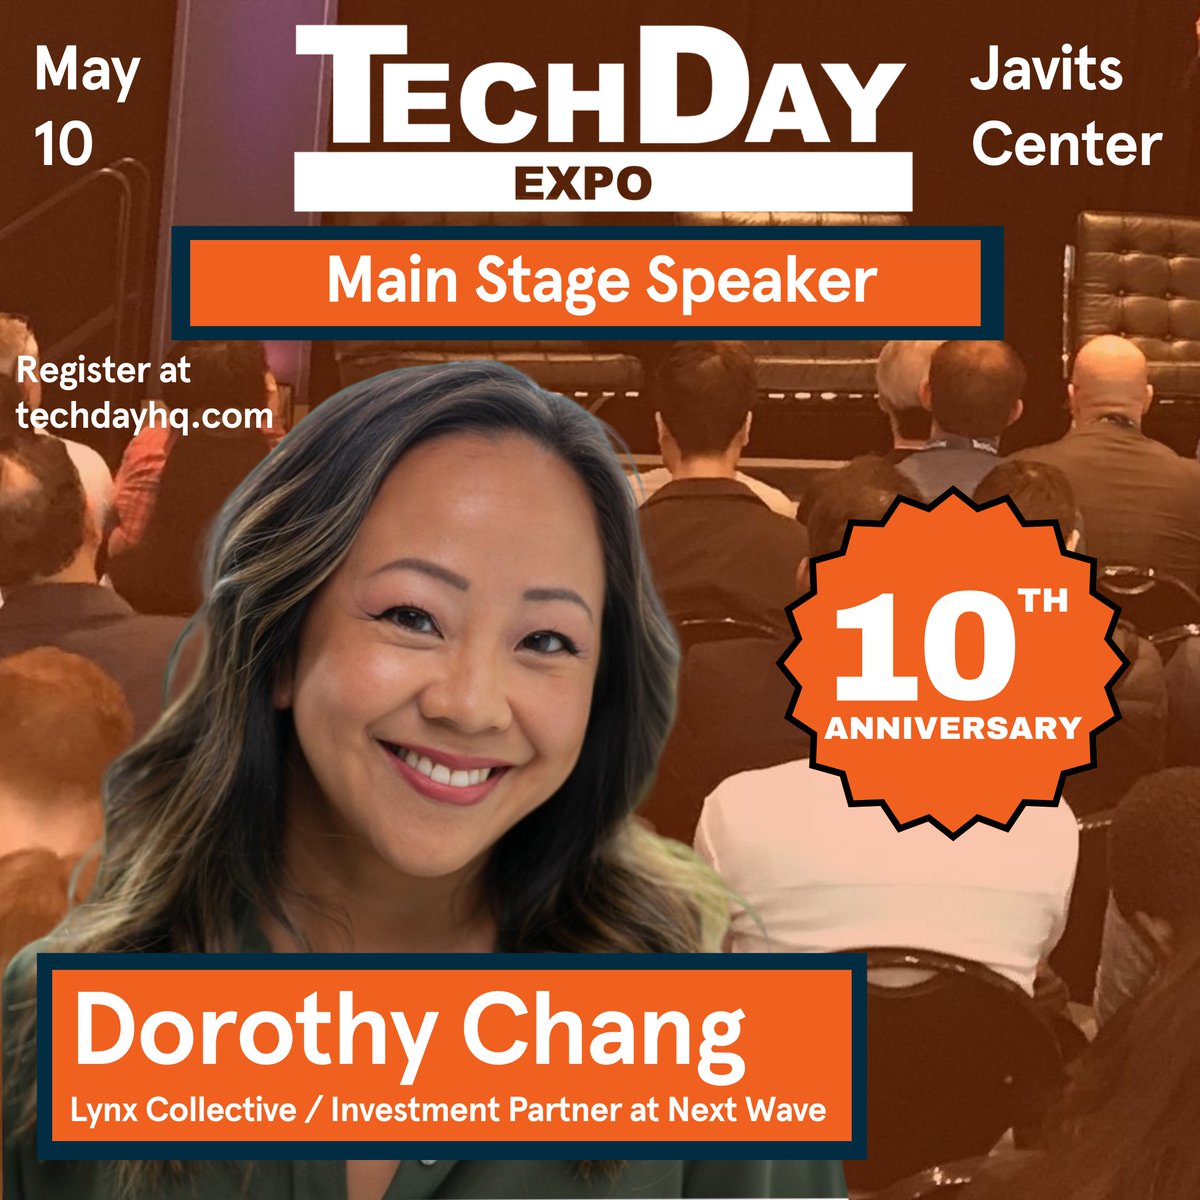 Next week see @djof @lynx_collective & @NextWaveNYC alongside @srcasm of @flybridge & Next Wave NYC, on our main stage for our 'Way Back When Panel' charting the rise of the NYC ecosystem at #TechDay May 10 @javitscenter! Don't miss out: techdayhq.com/expo-attendee-…